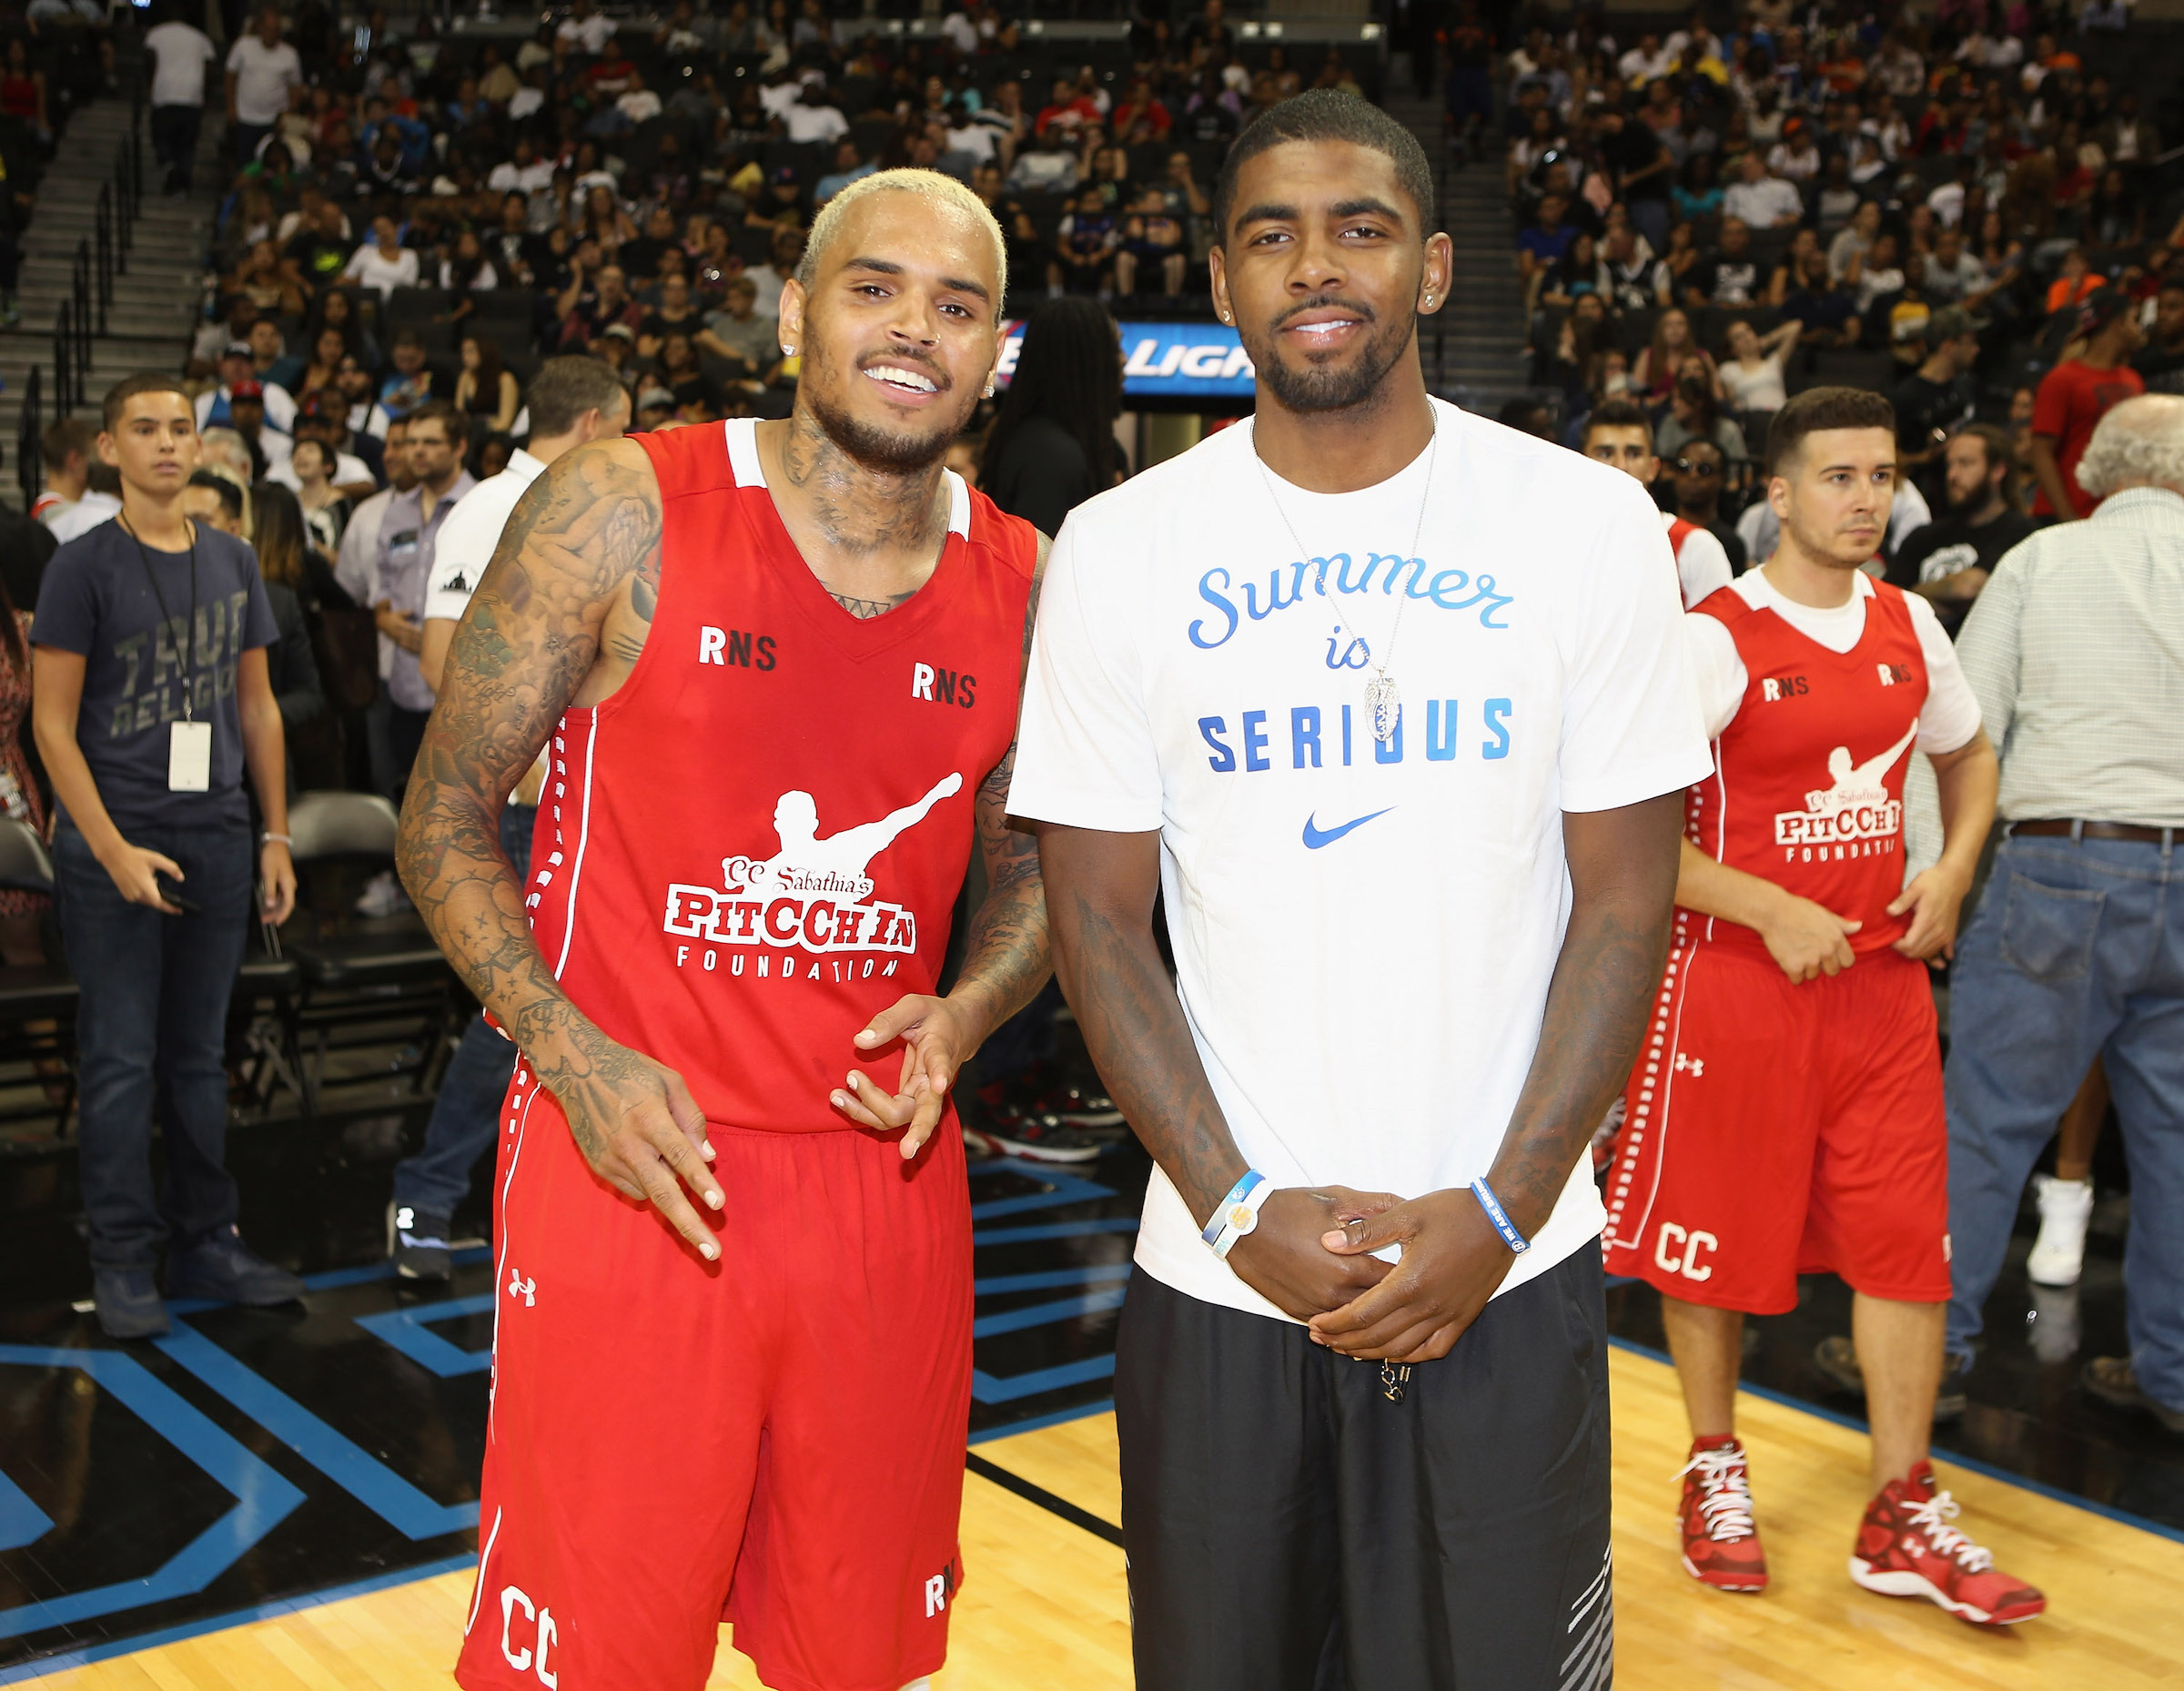 Chris Brown and Kyrie Irving smiling